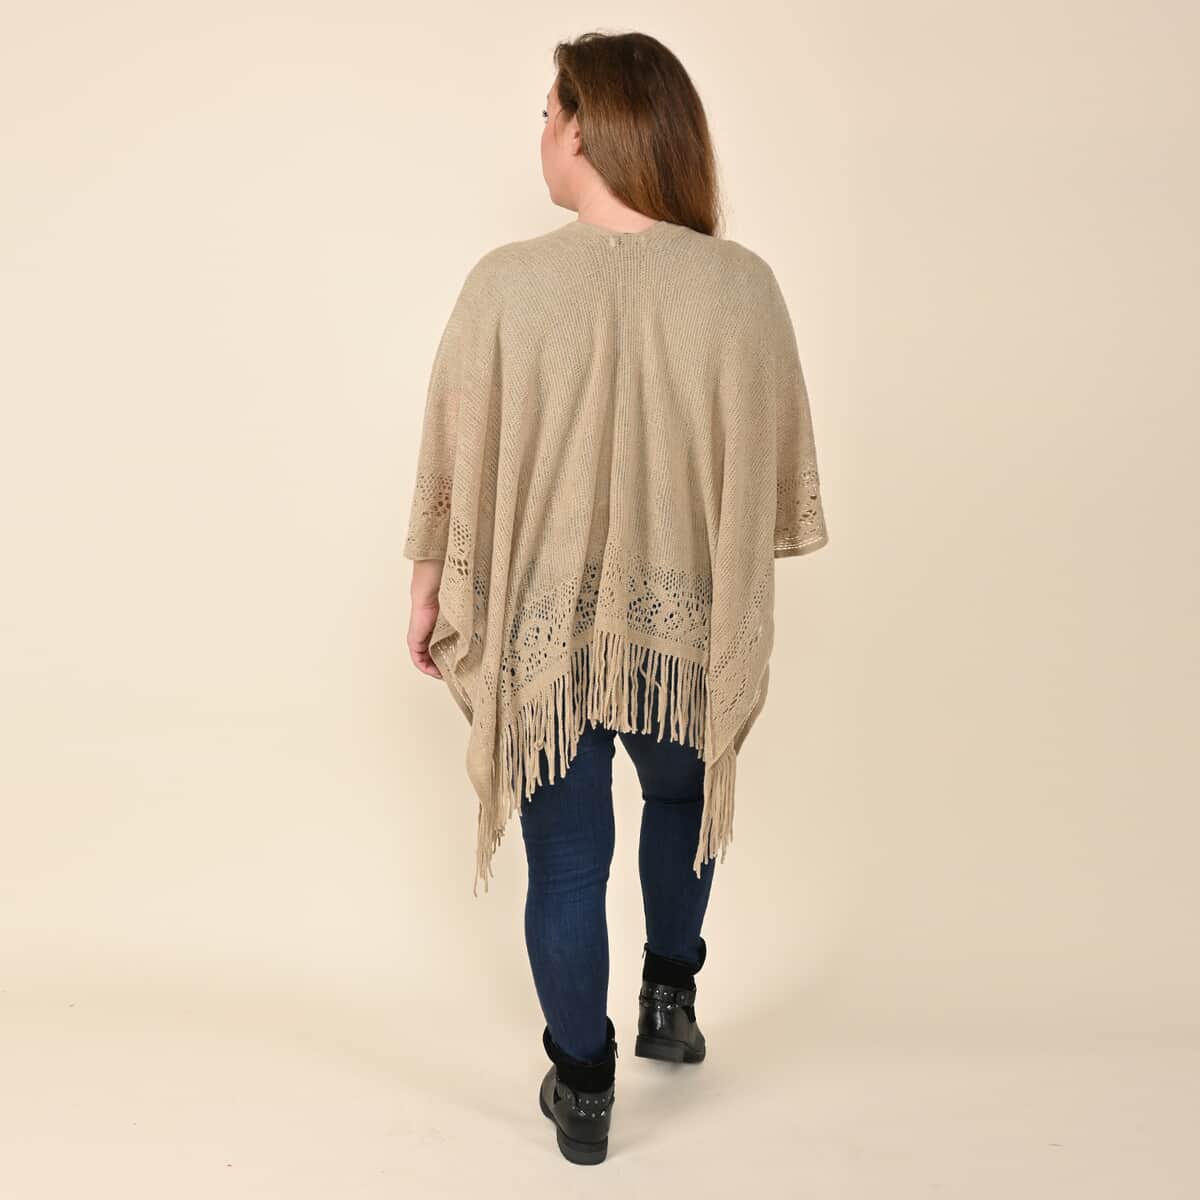 TAMSY Beige Solid Knitted Poncho (One Size Fits Most, 21.6"x38.5") image number 1